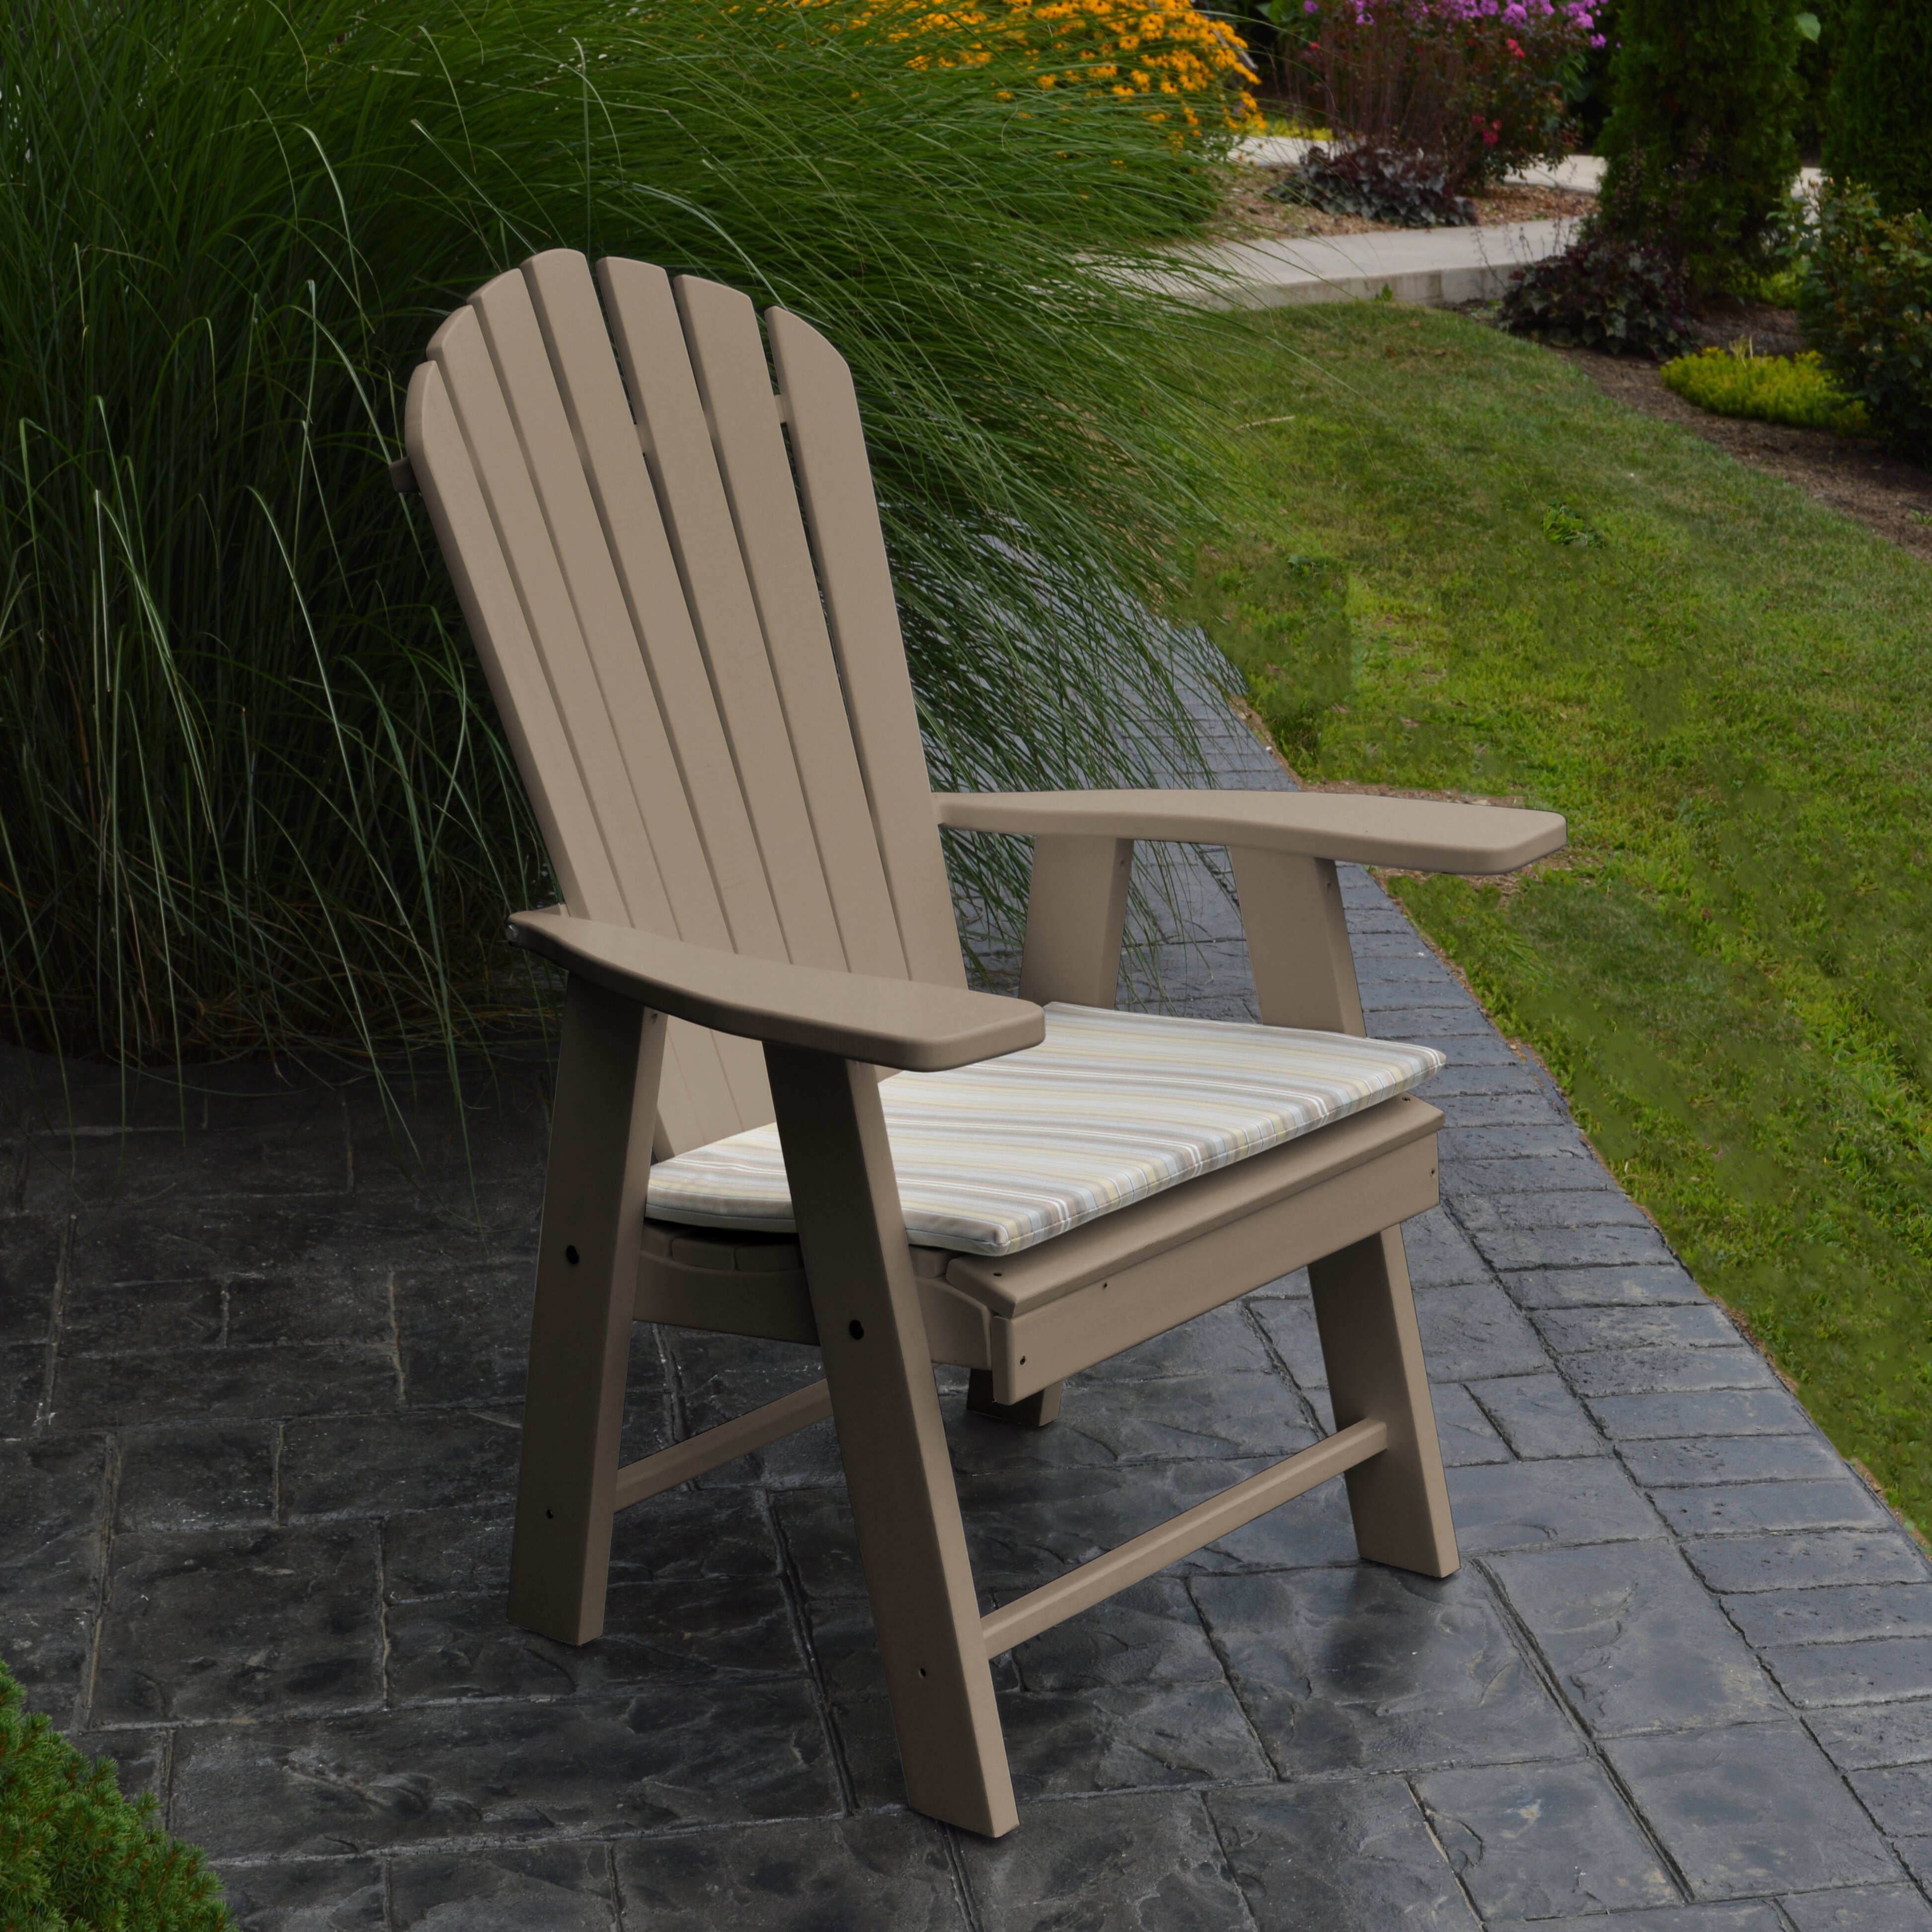 upright adirondack chair plans - 28 images - cr plastic 